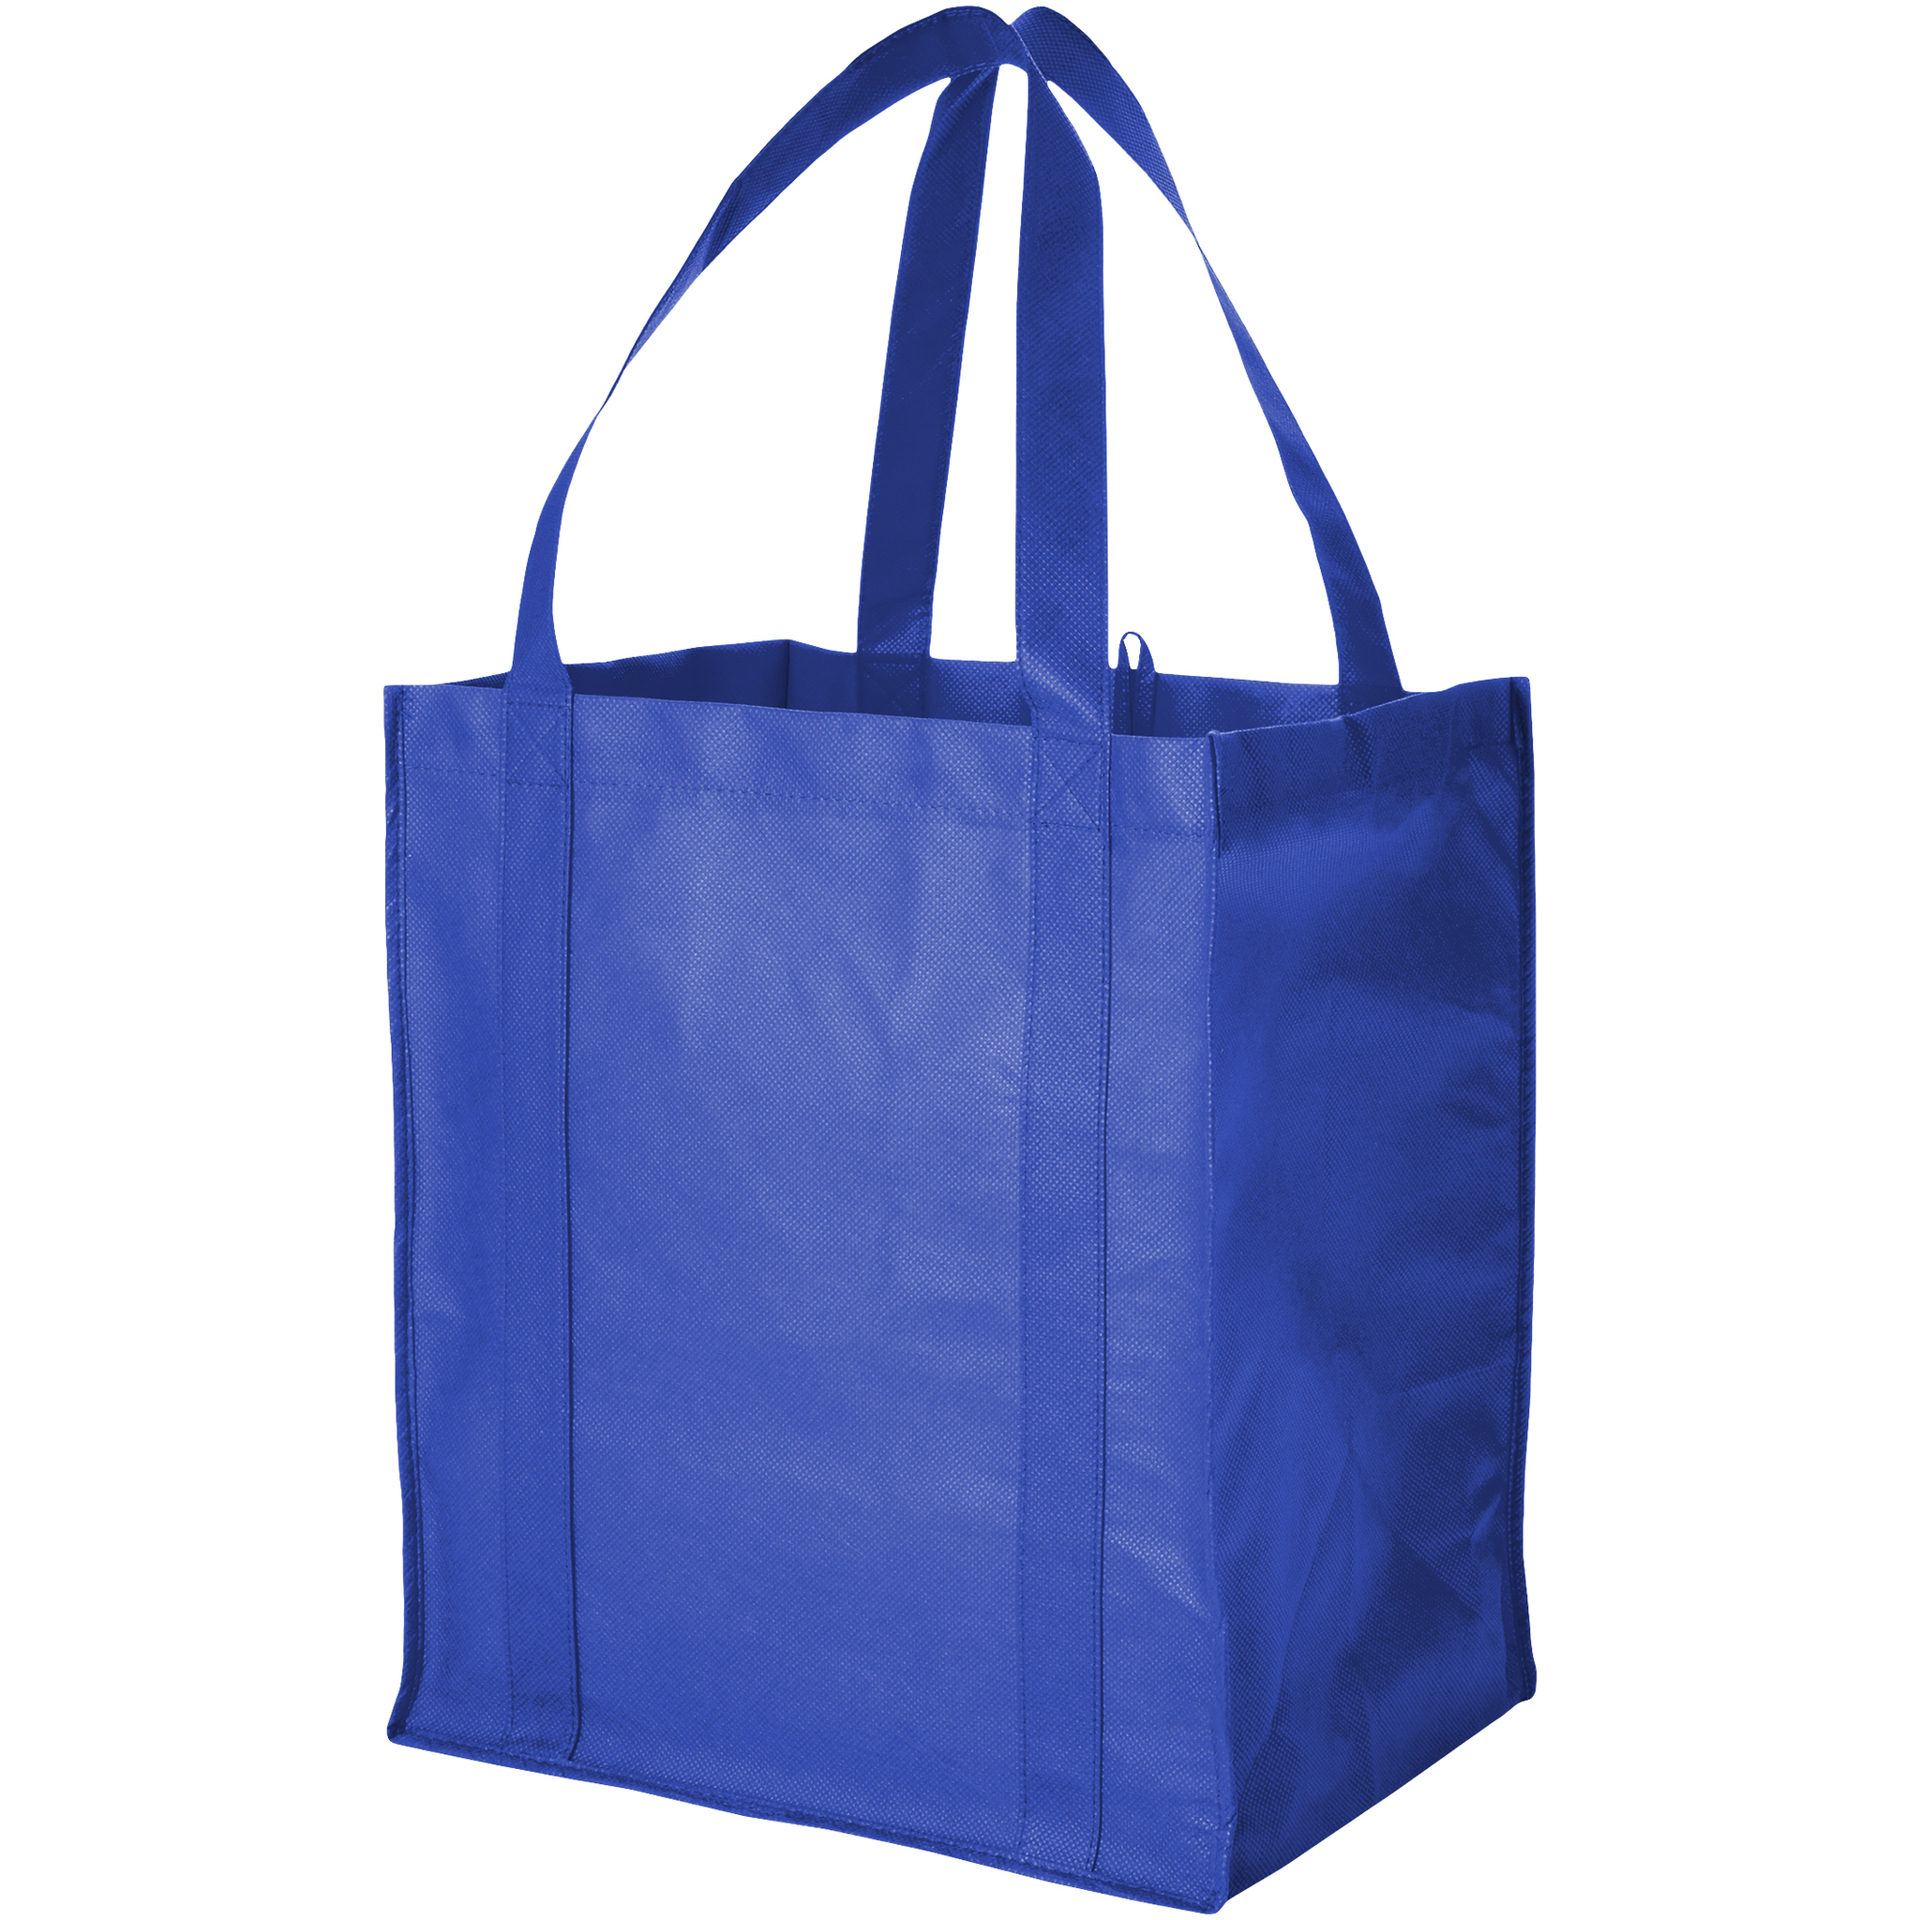 Blue reusable grocery bag with side gussets and carry straps